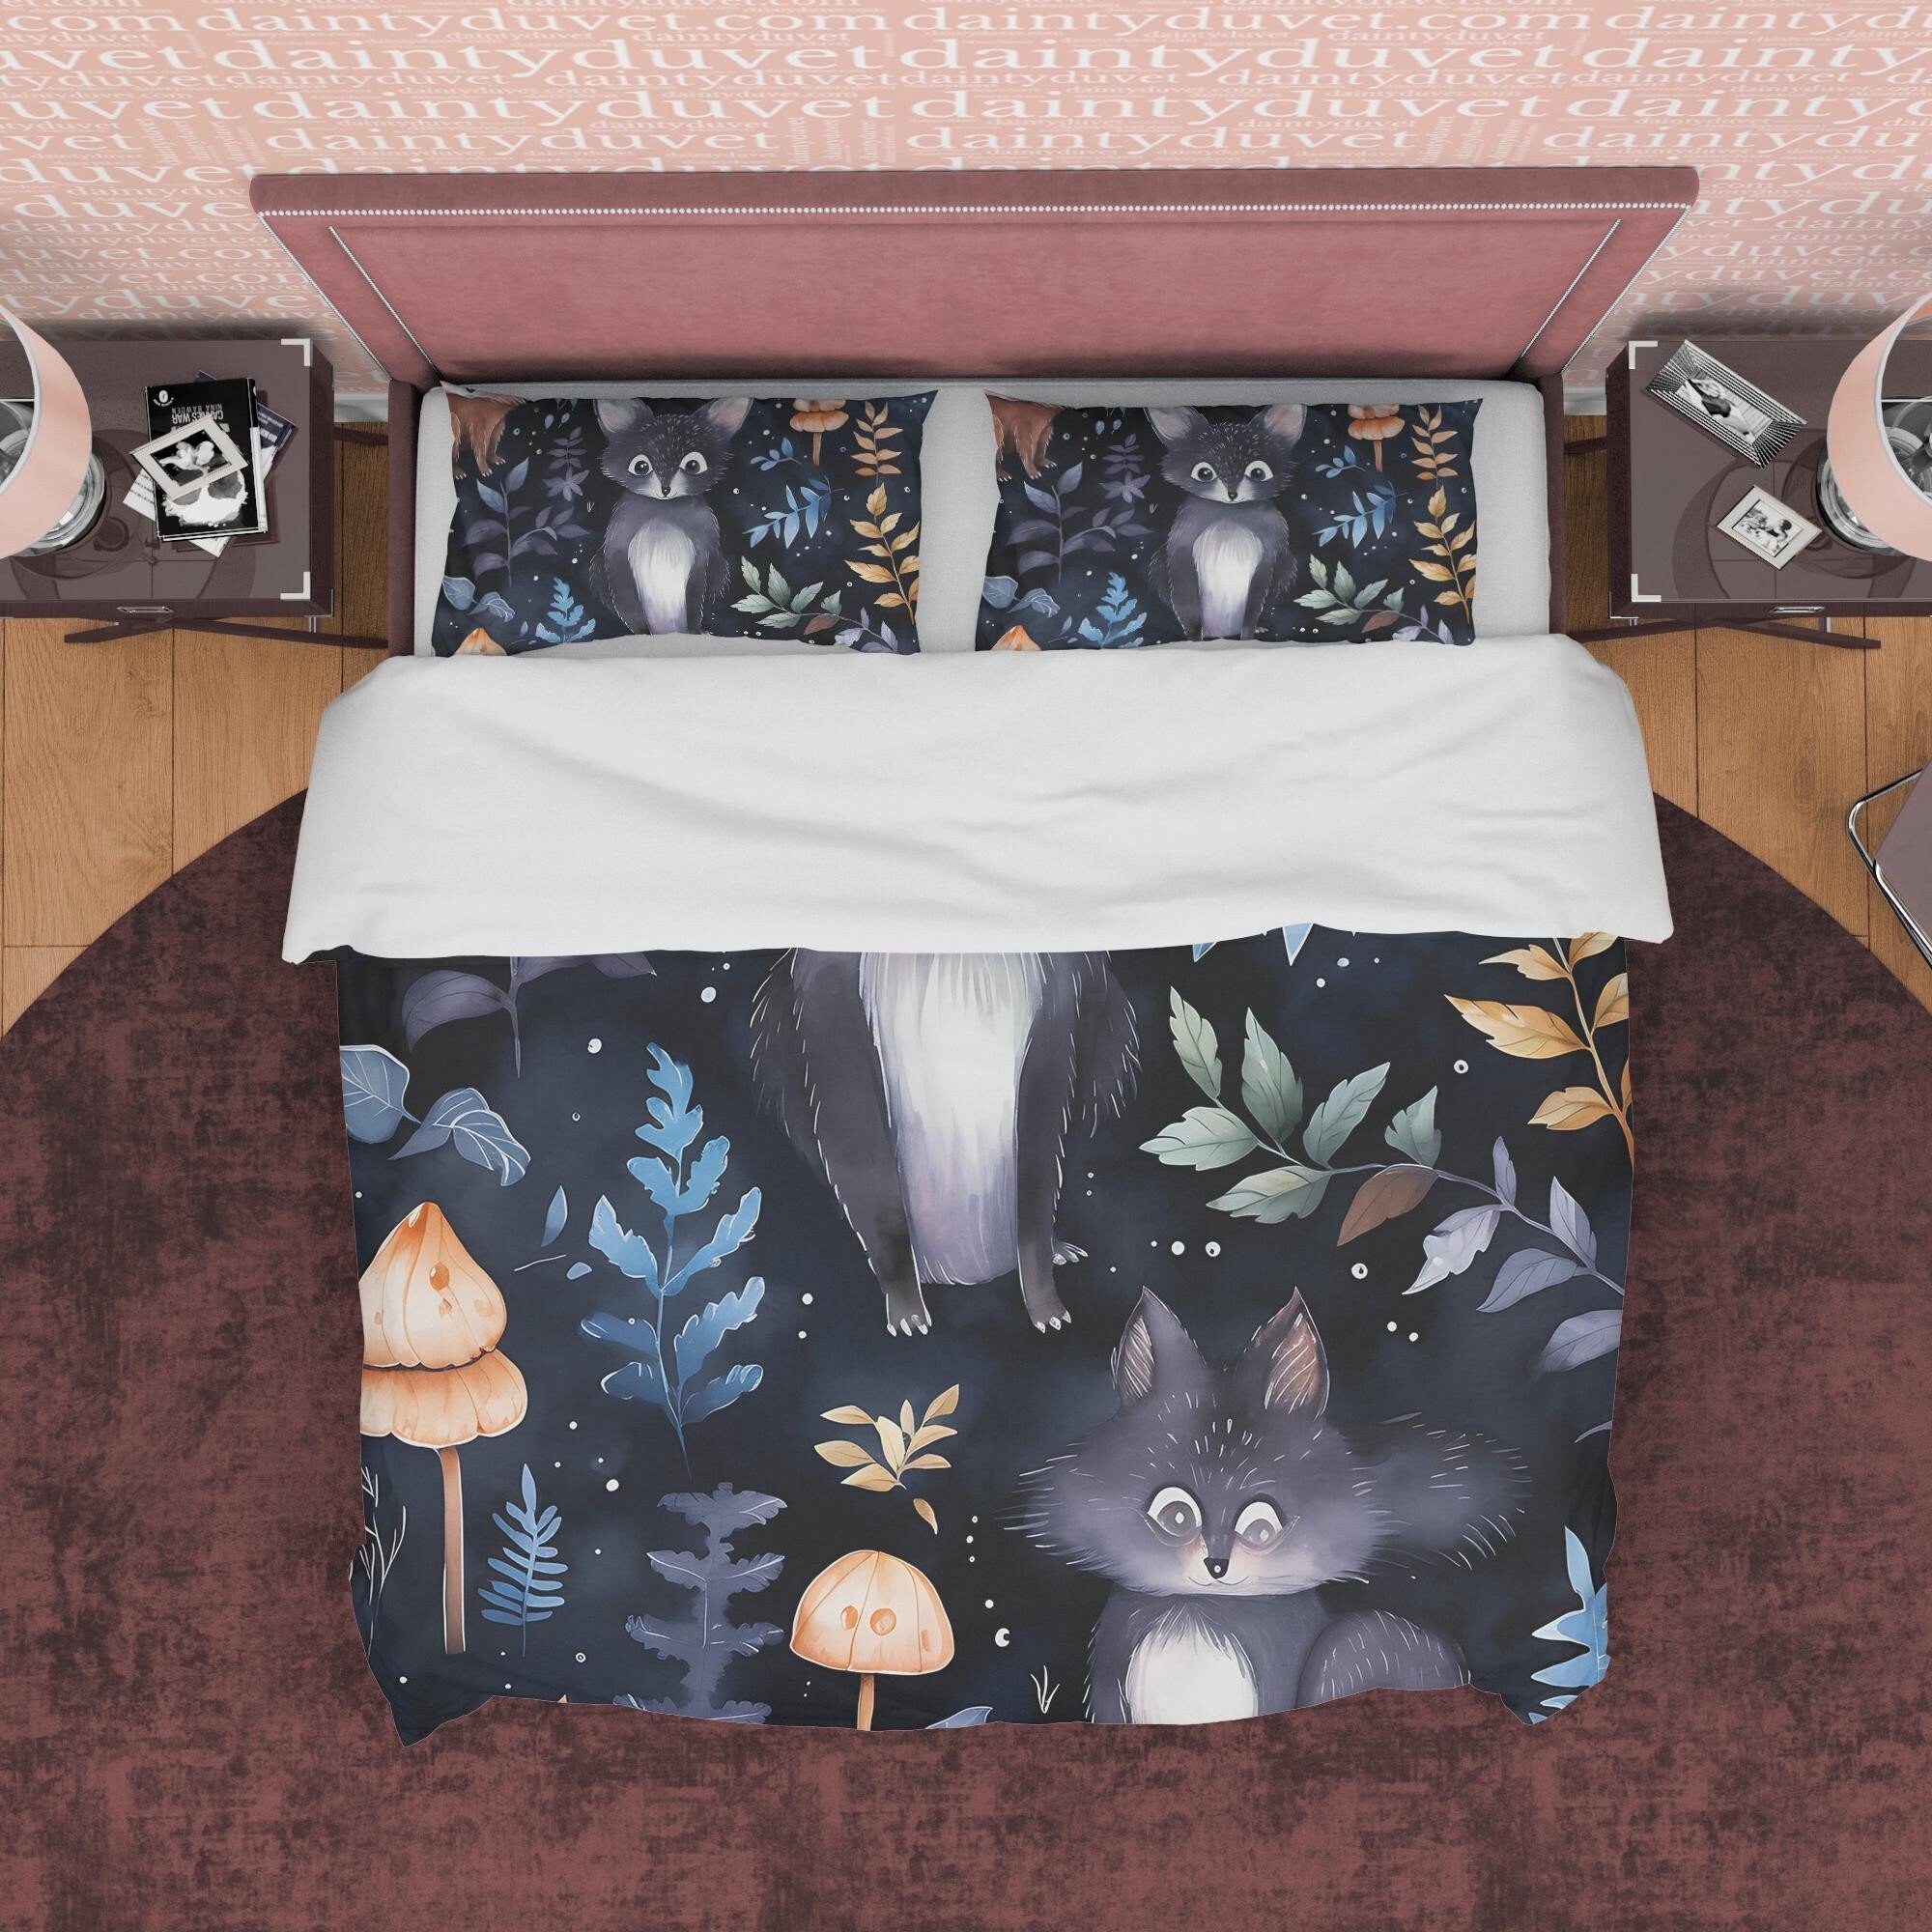 Scary Cat Duvet Cover Set, Child Bedroom Quilt Cover Enchanted Plant Aesthetic Zipper Bedding, Halloween Room Decor, Black Quilt Cover